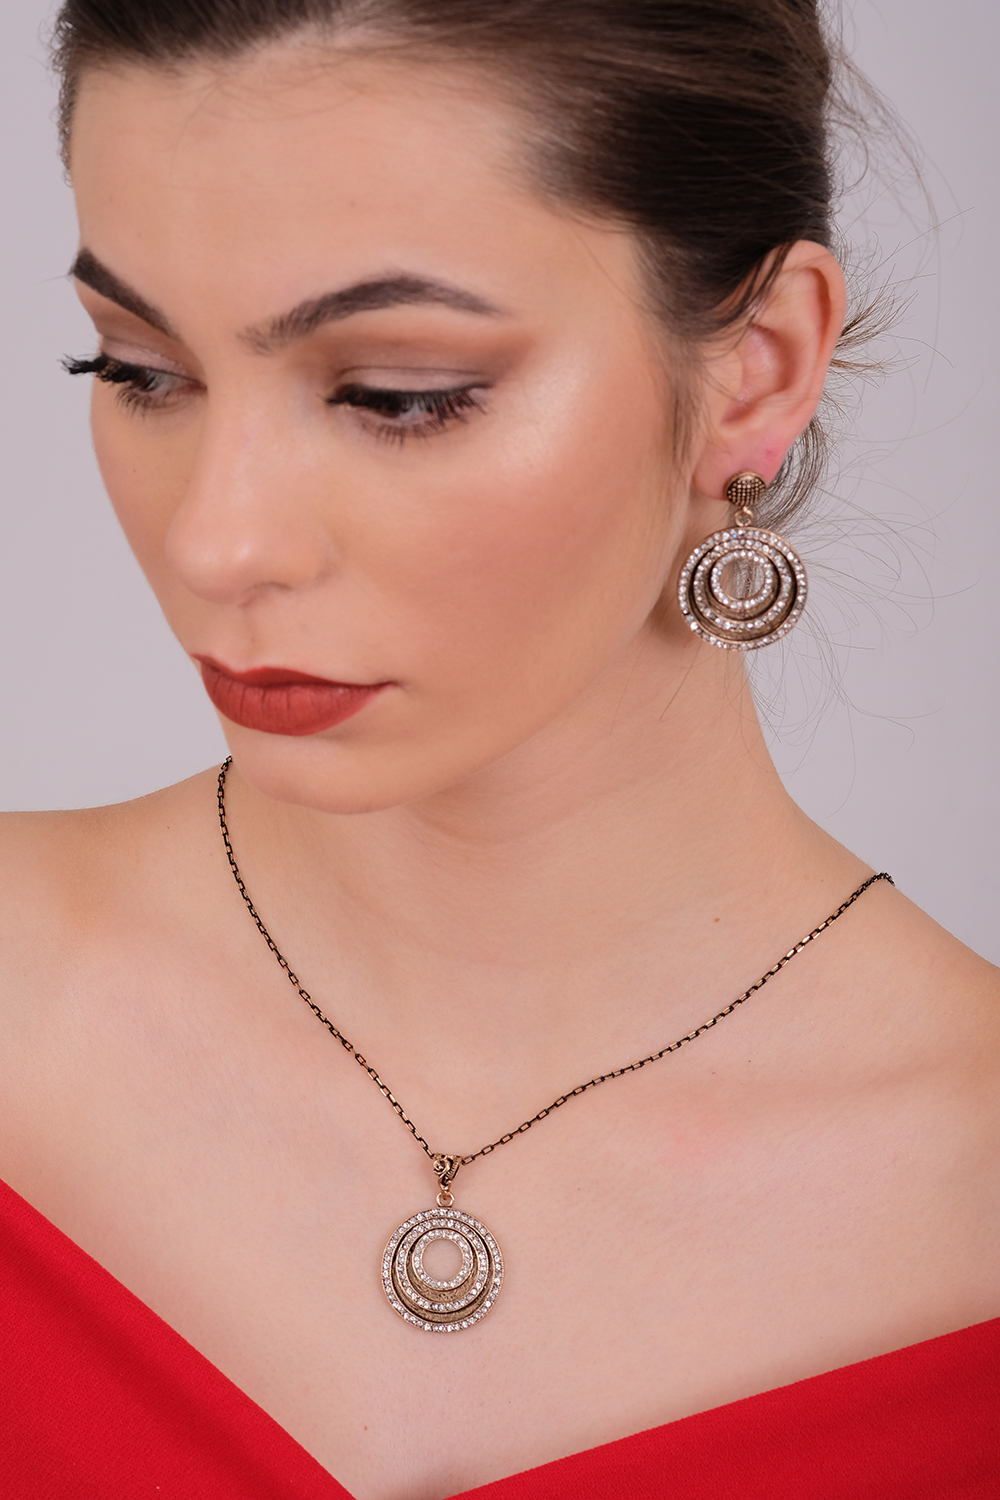 NATASA Necklace and Earrings Jewelry Set